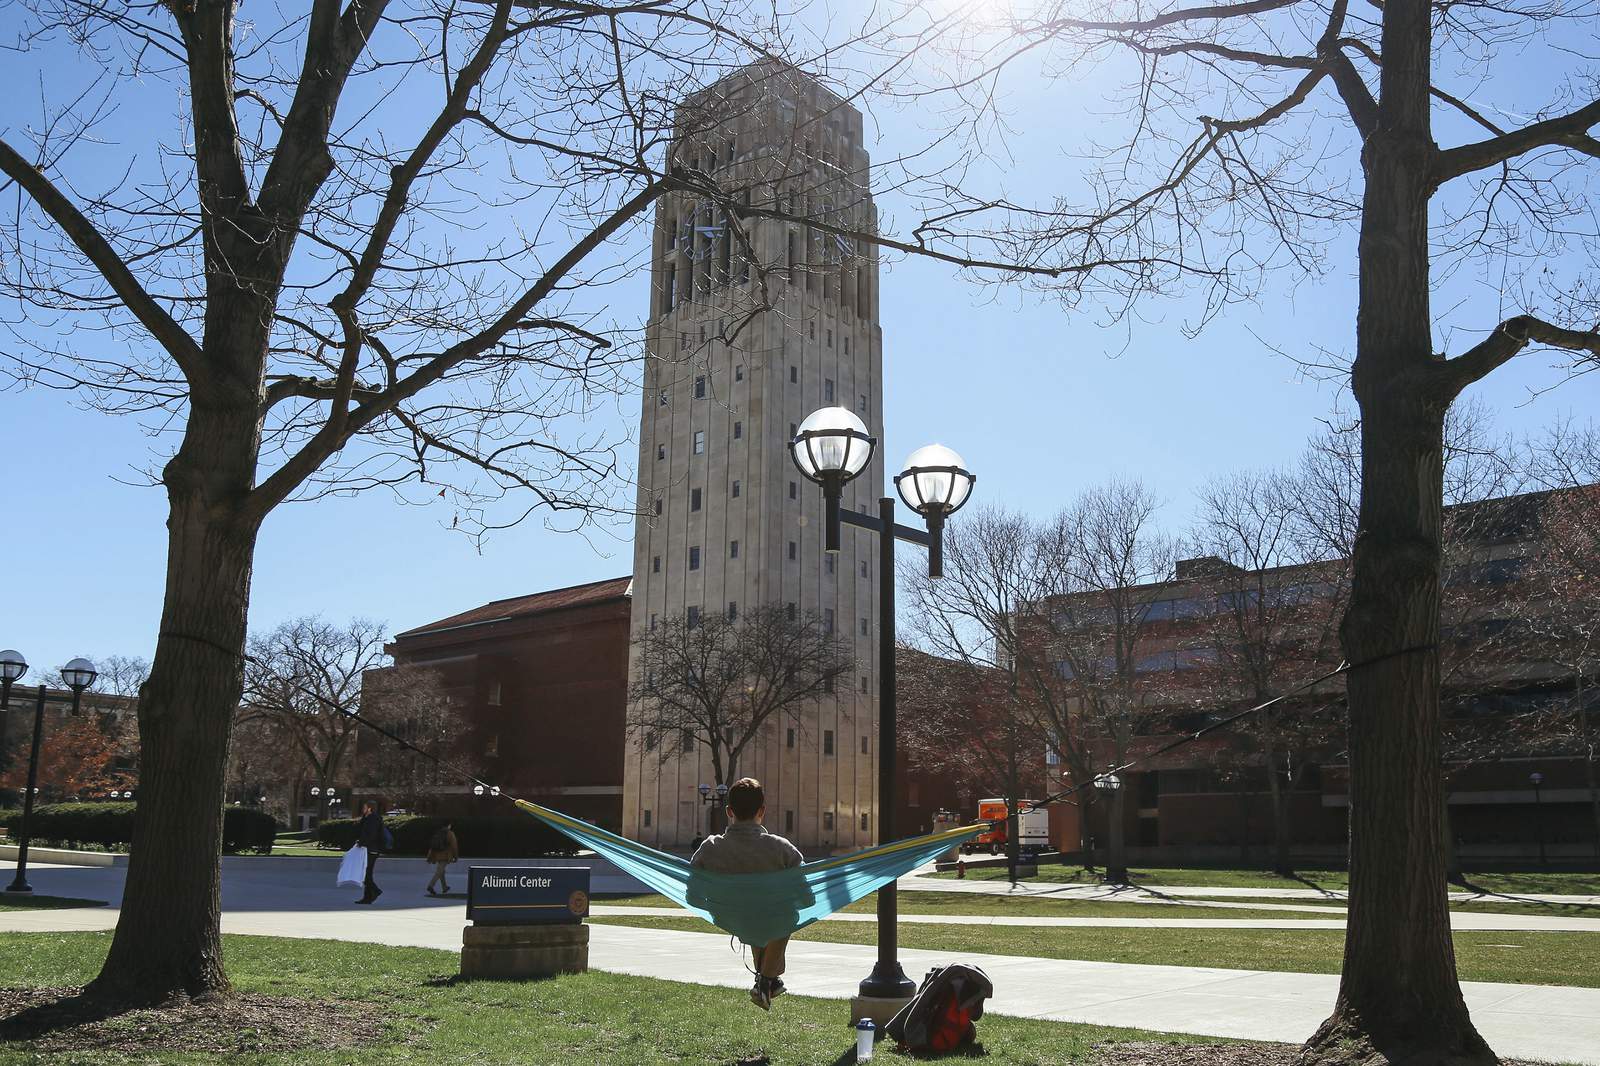 University of Michigan academic calendar: Here are the new dates for